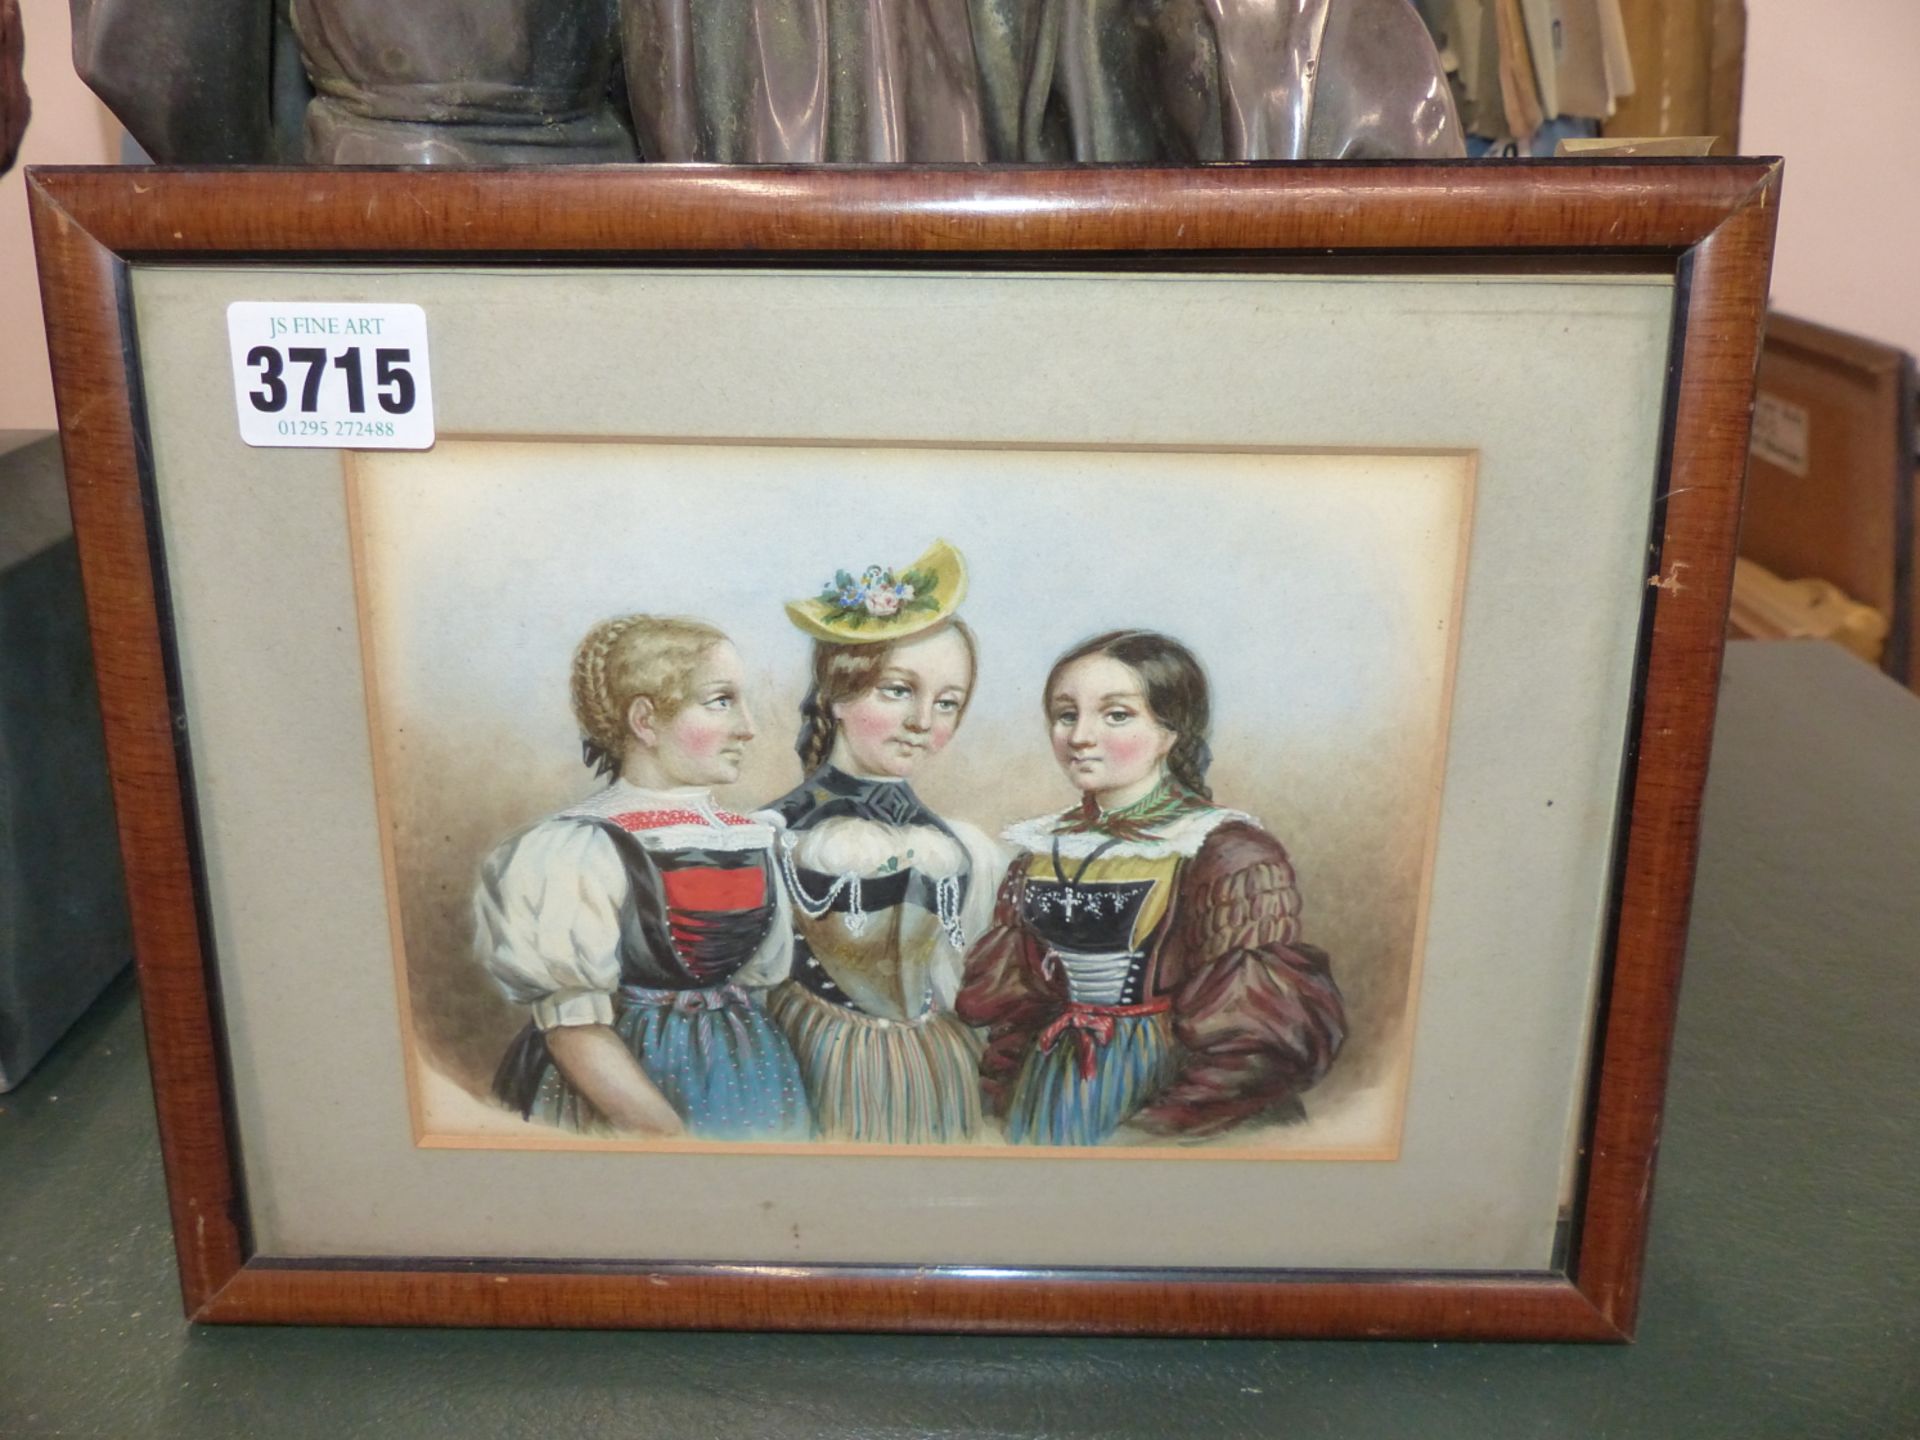 LATE 19TH CENTURY/ EARLY 20TH CENTURY GERMAN SCHOOL.- THREE GIRLS IN TRADITIONAL DRESS- WATERCOLOUR. - Image 3 of 4